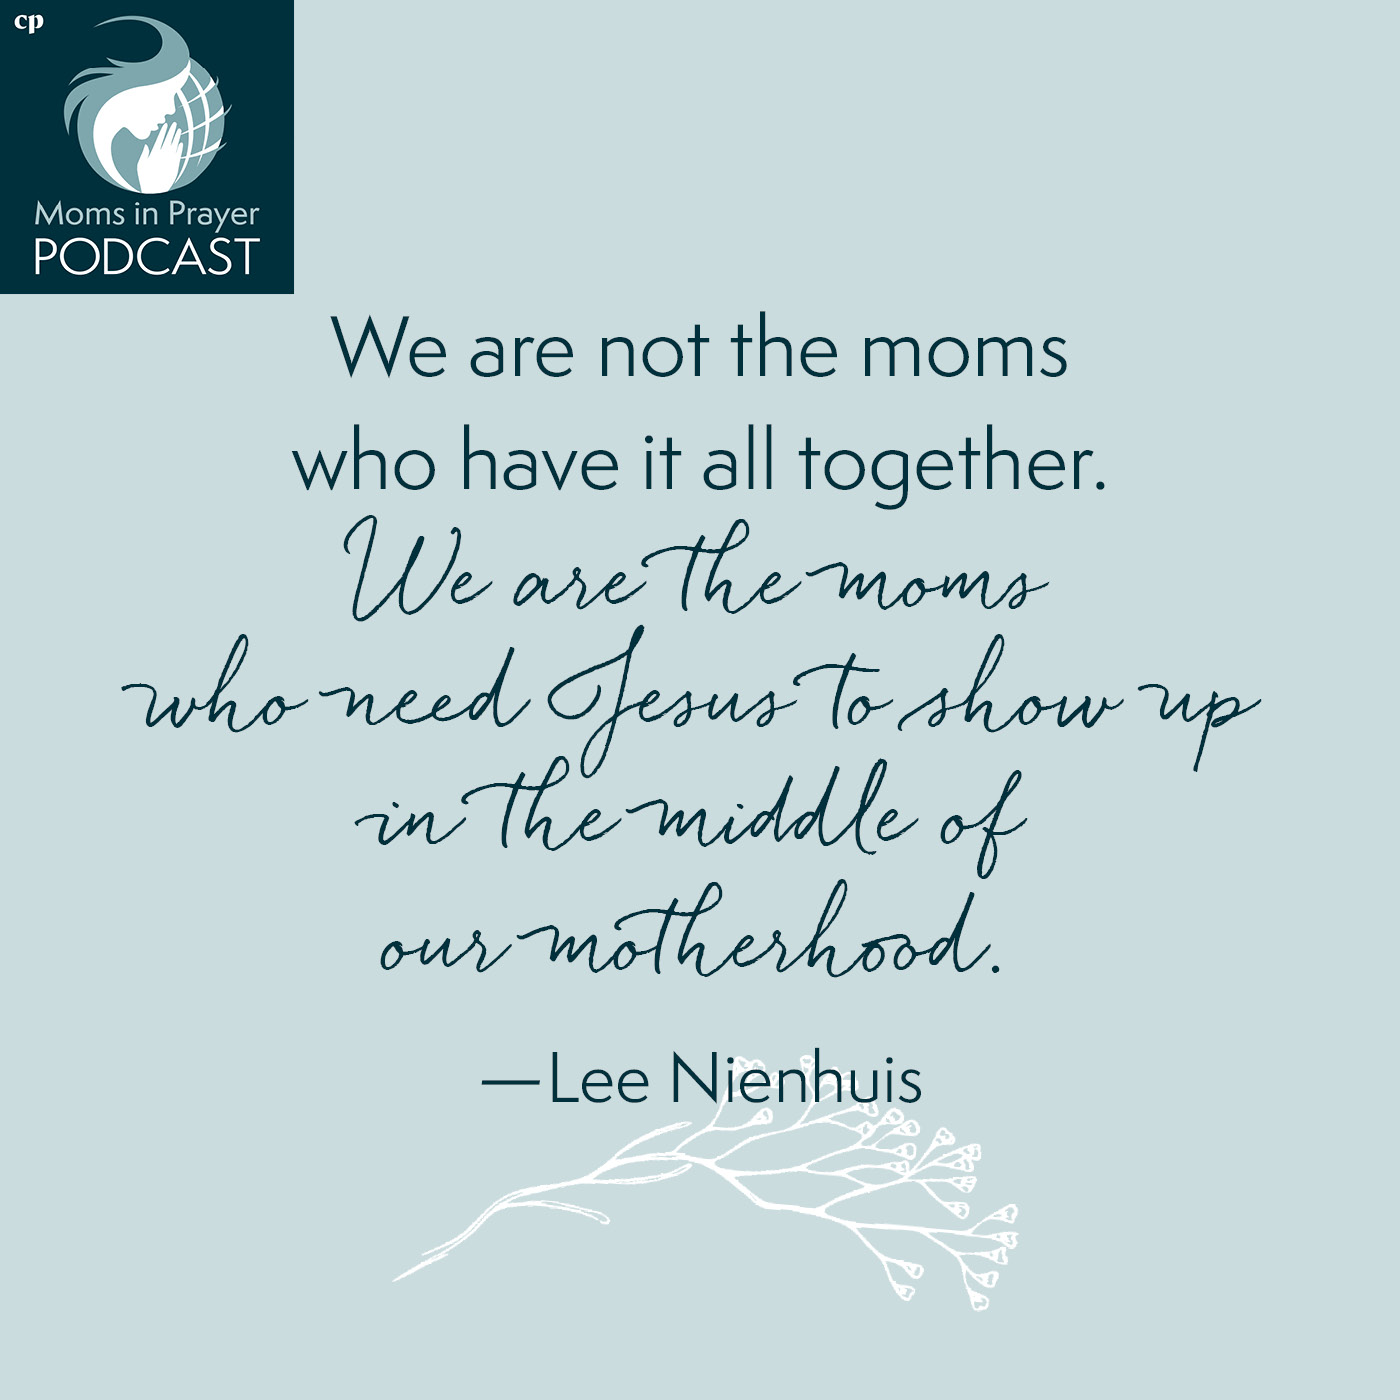 We are not moms who have it all together. Moms who need Jesus.